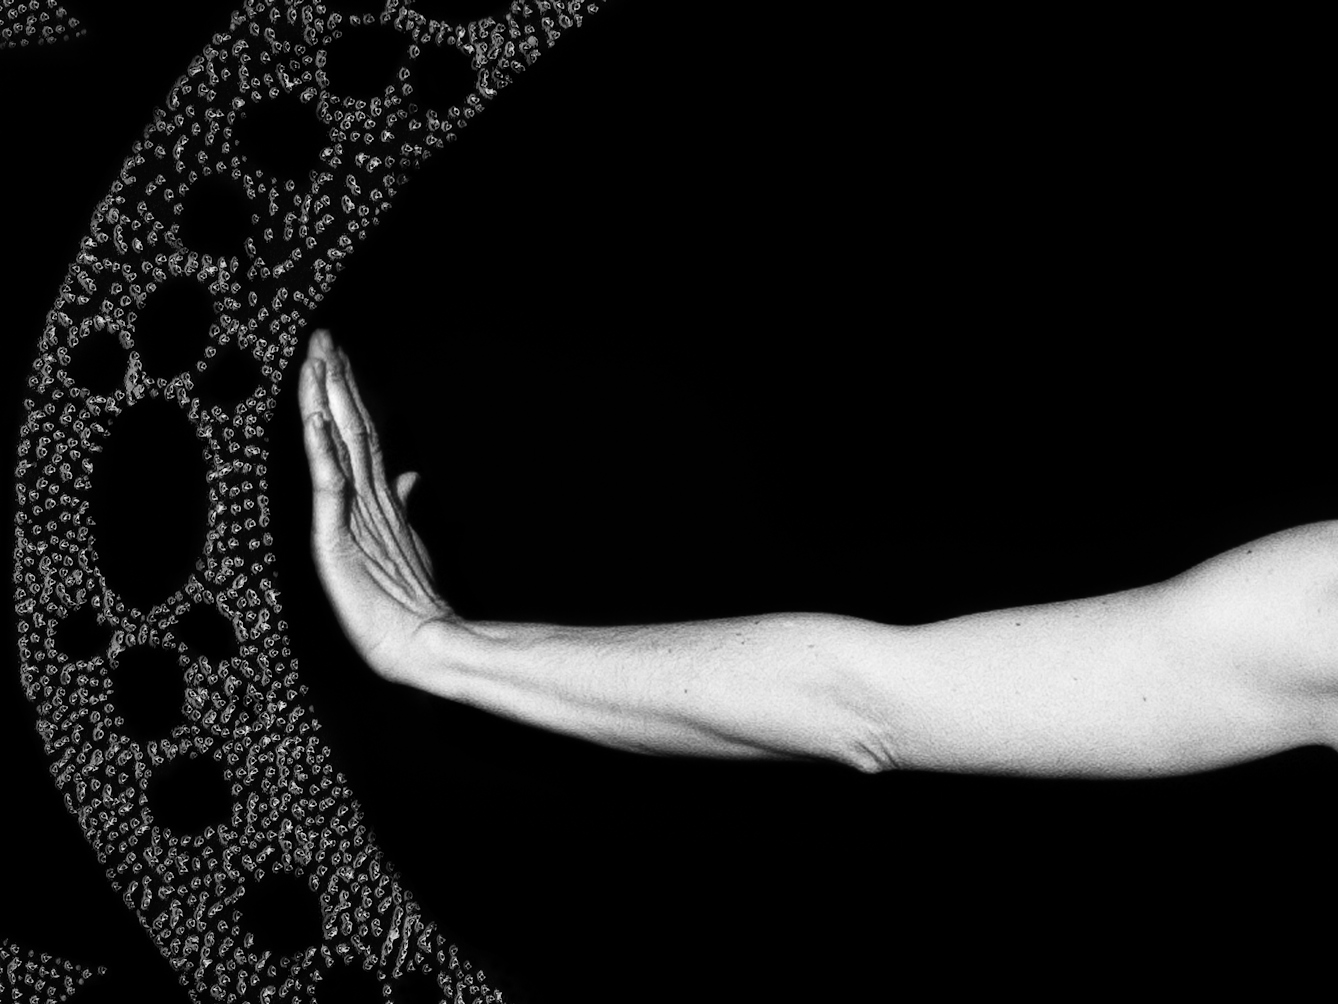 Artwork made up of a black and white photograph of a female figure from behind, from against a black background. Her left arm is held out straight to the side, her wrist and hand are held up indicating a stop action. To the left of her hand is part of a large ellipse made up of a layered texture of dots which forms a protective barrier against sharp tooth like forms approaching the barrier, also made up of layered textured dots.